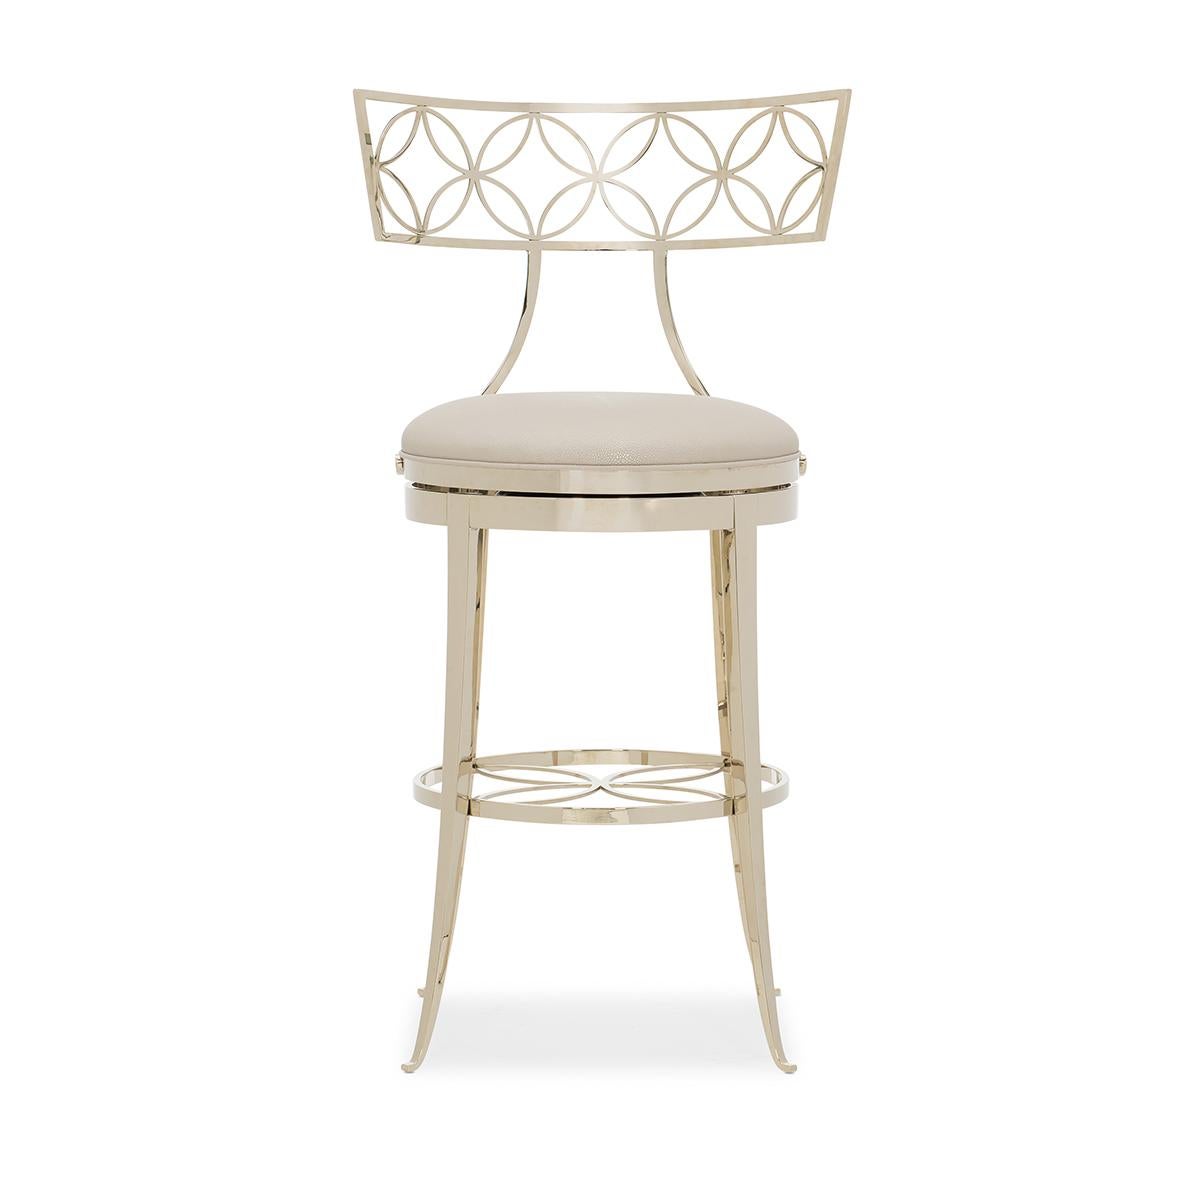 Klismos gold barstool, a plated gold finish accentuates its bold curves and elegant detailing. It boasts a Klismos shape combined with open metalwork featuring a quatrefoil pattern. A faux shagreen upholstered seat adds another layer of comfort, as